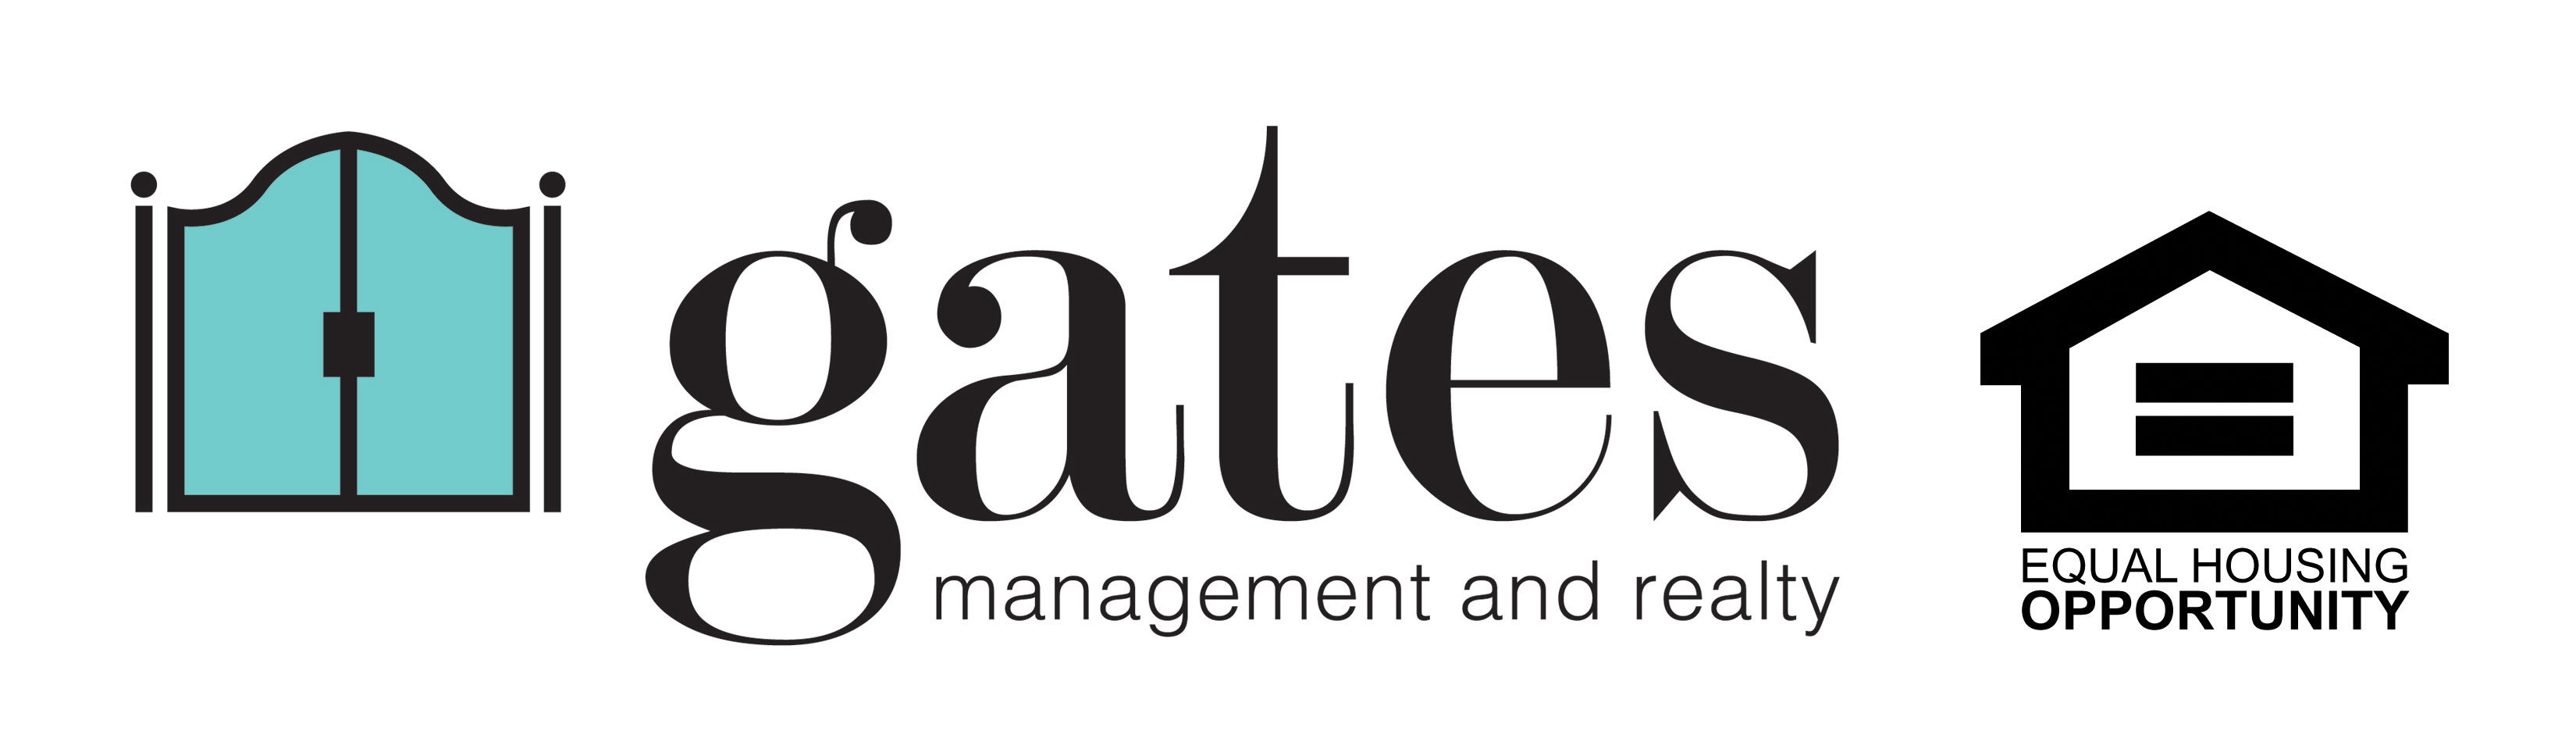 Gates Management and Realty Logo